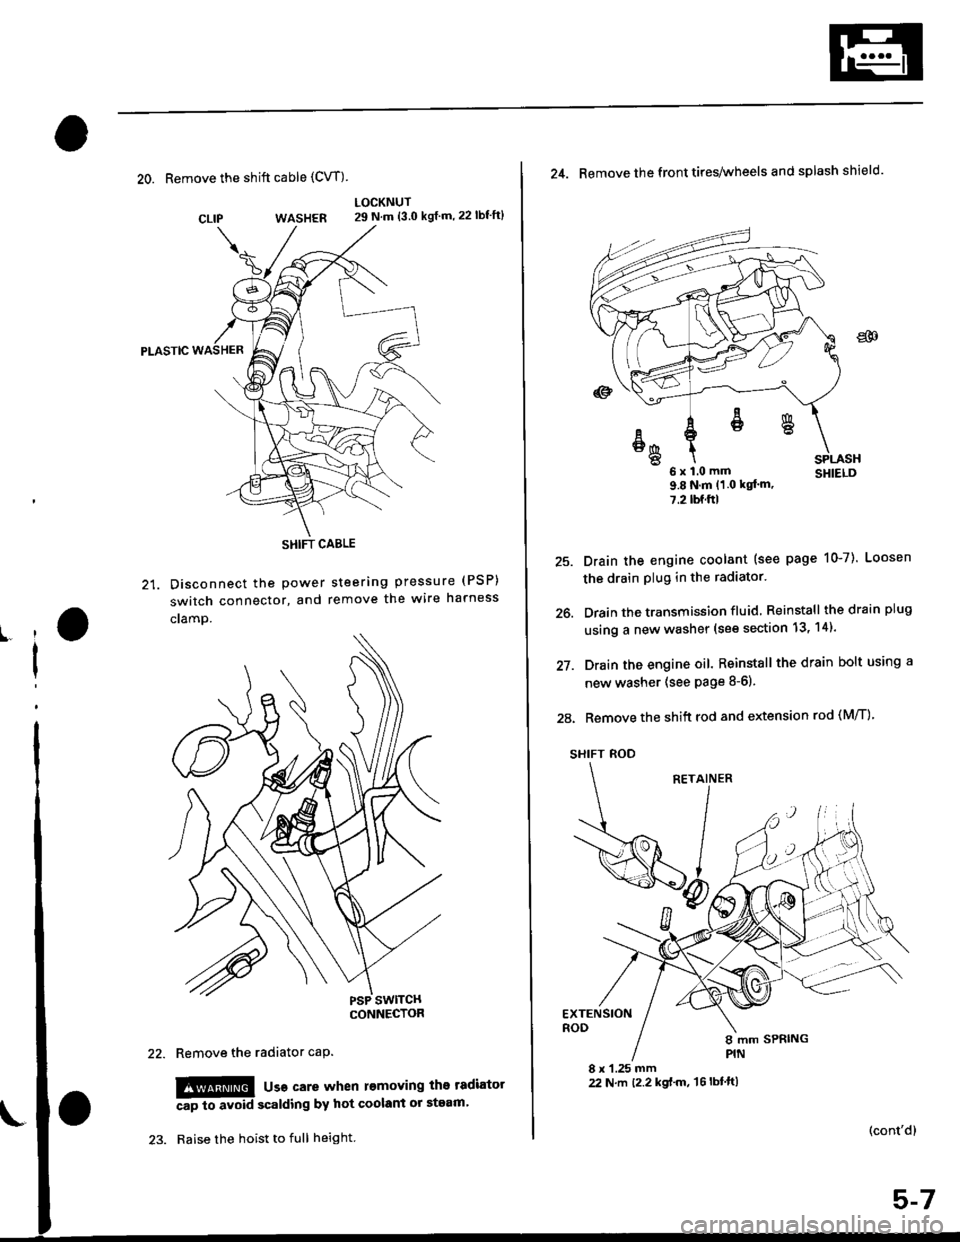 HONDA CIVIC 1996 6.G Workshop Manual 20. Remove the shift cable (CVT)
WASHER
Pt-Aslc
21. Disconnect the Power
switch connector, and
cramp.
LOCKNUT29 N.m {3.0 kgf m,22lbfft}
steering pressure (PSP)
remove the wire harness
CLIP
ll
I
Remov